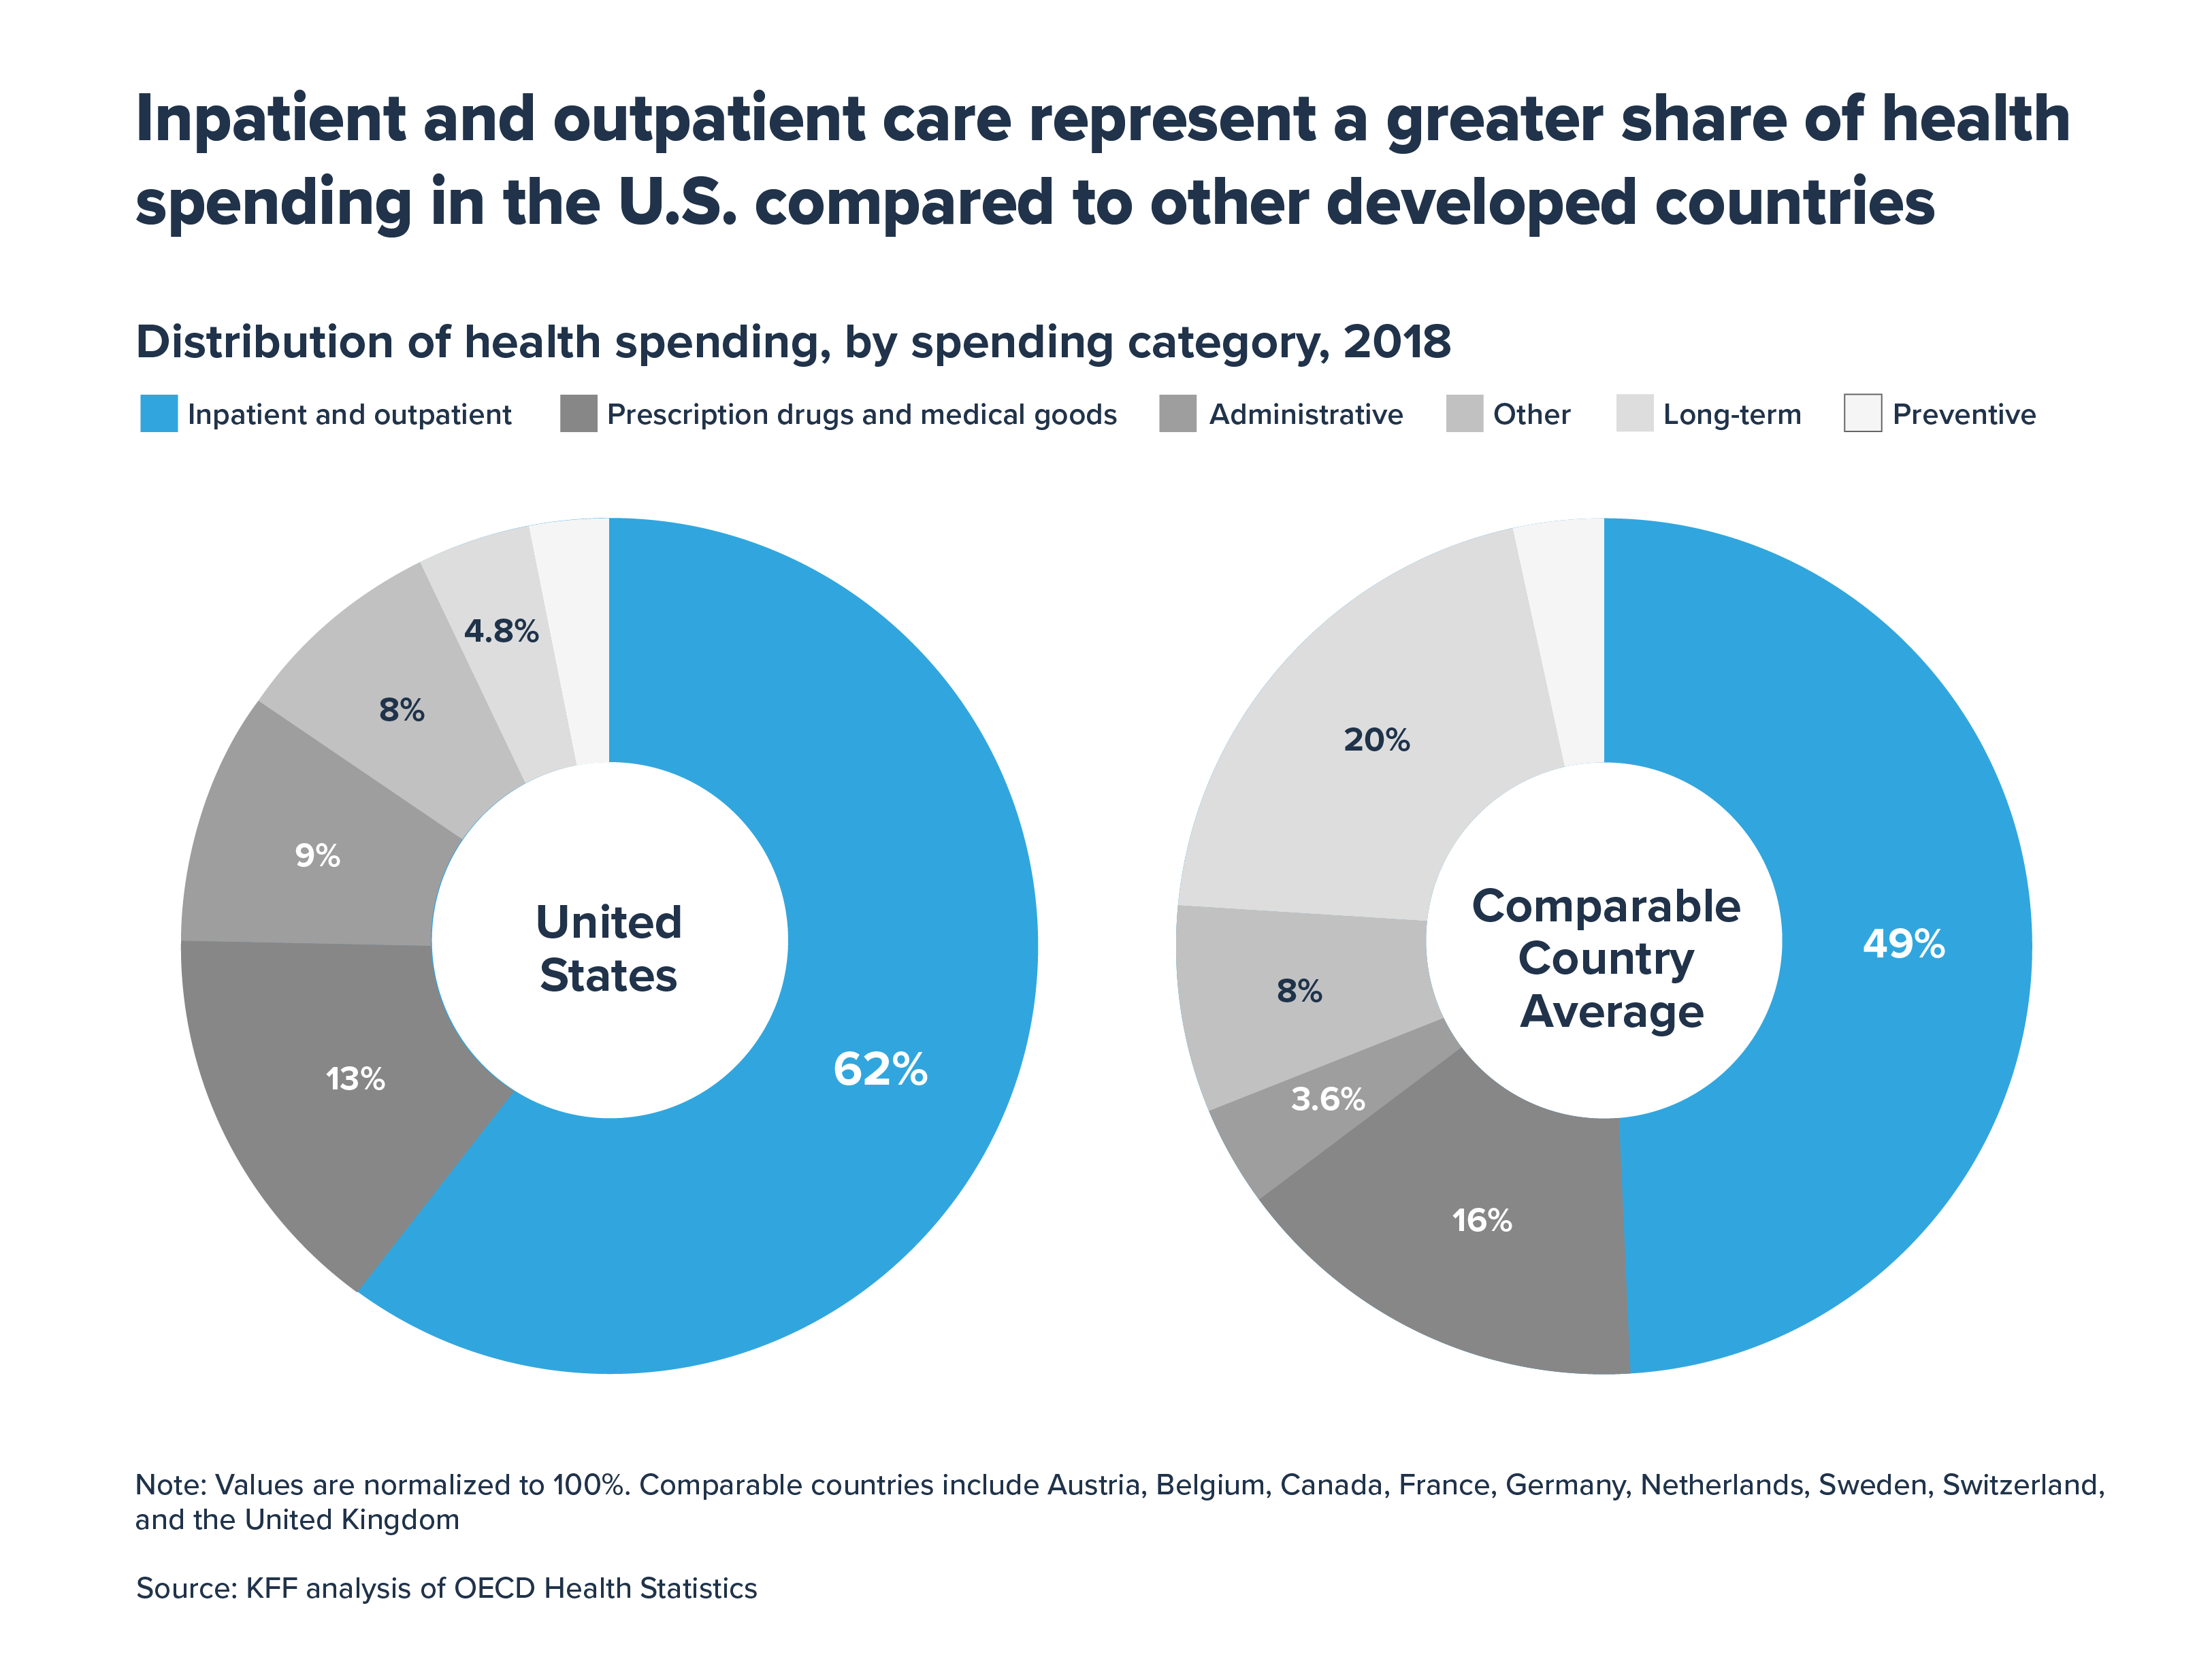 Study: Hospital and outpatient care are biggest drivers of health care spending differences between the United States and other countries